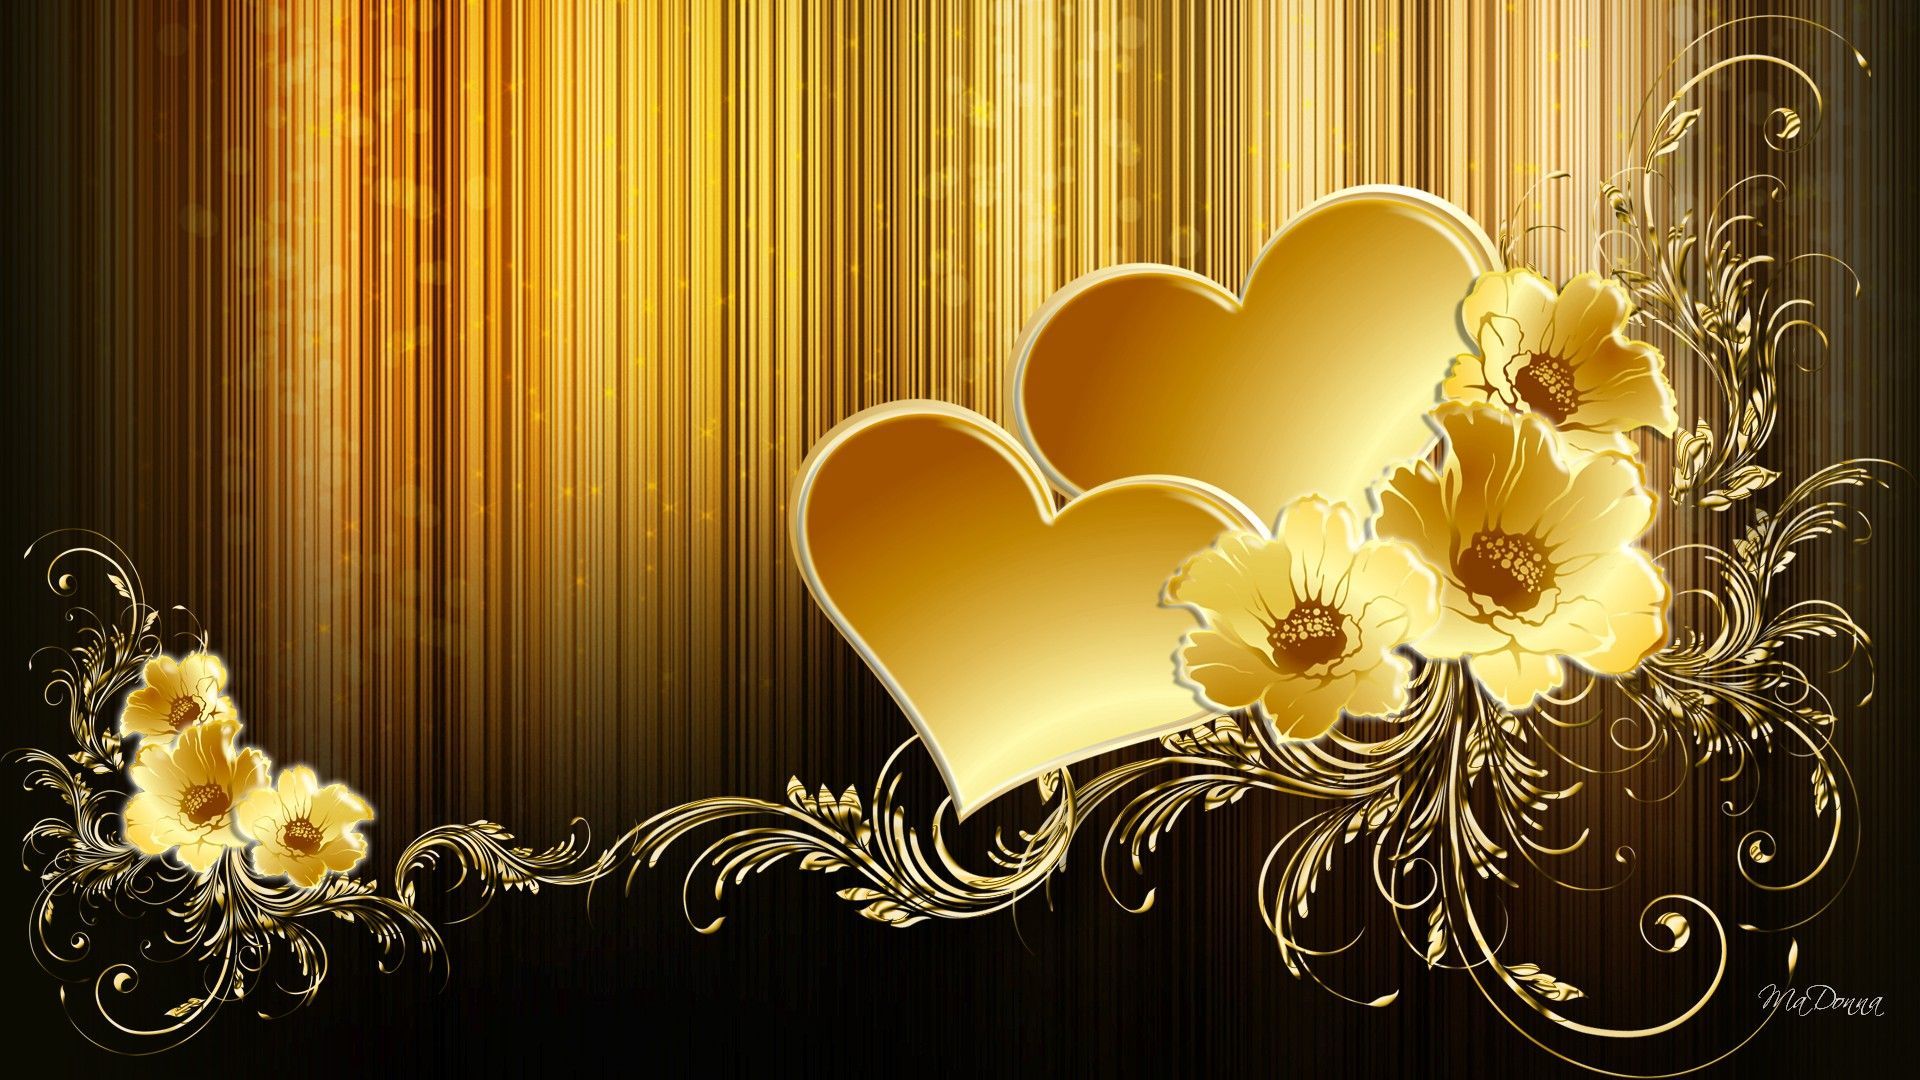 black and gold wallpaper,heart,yellow,love,floral design,plant